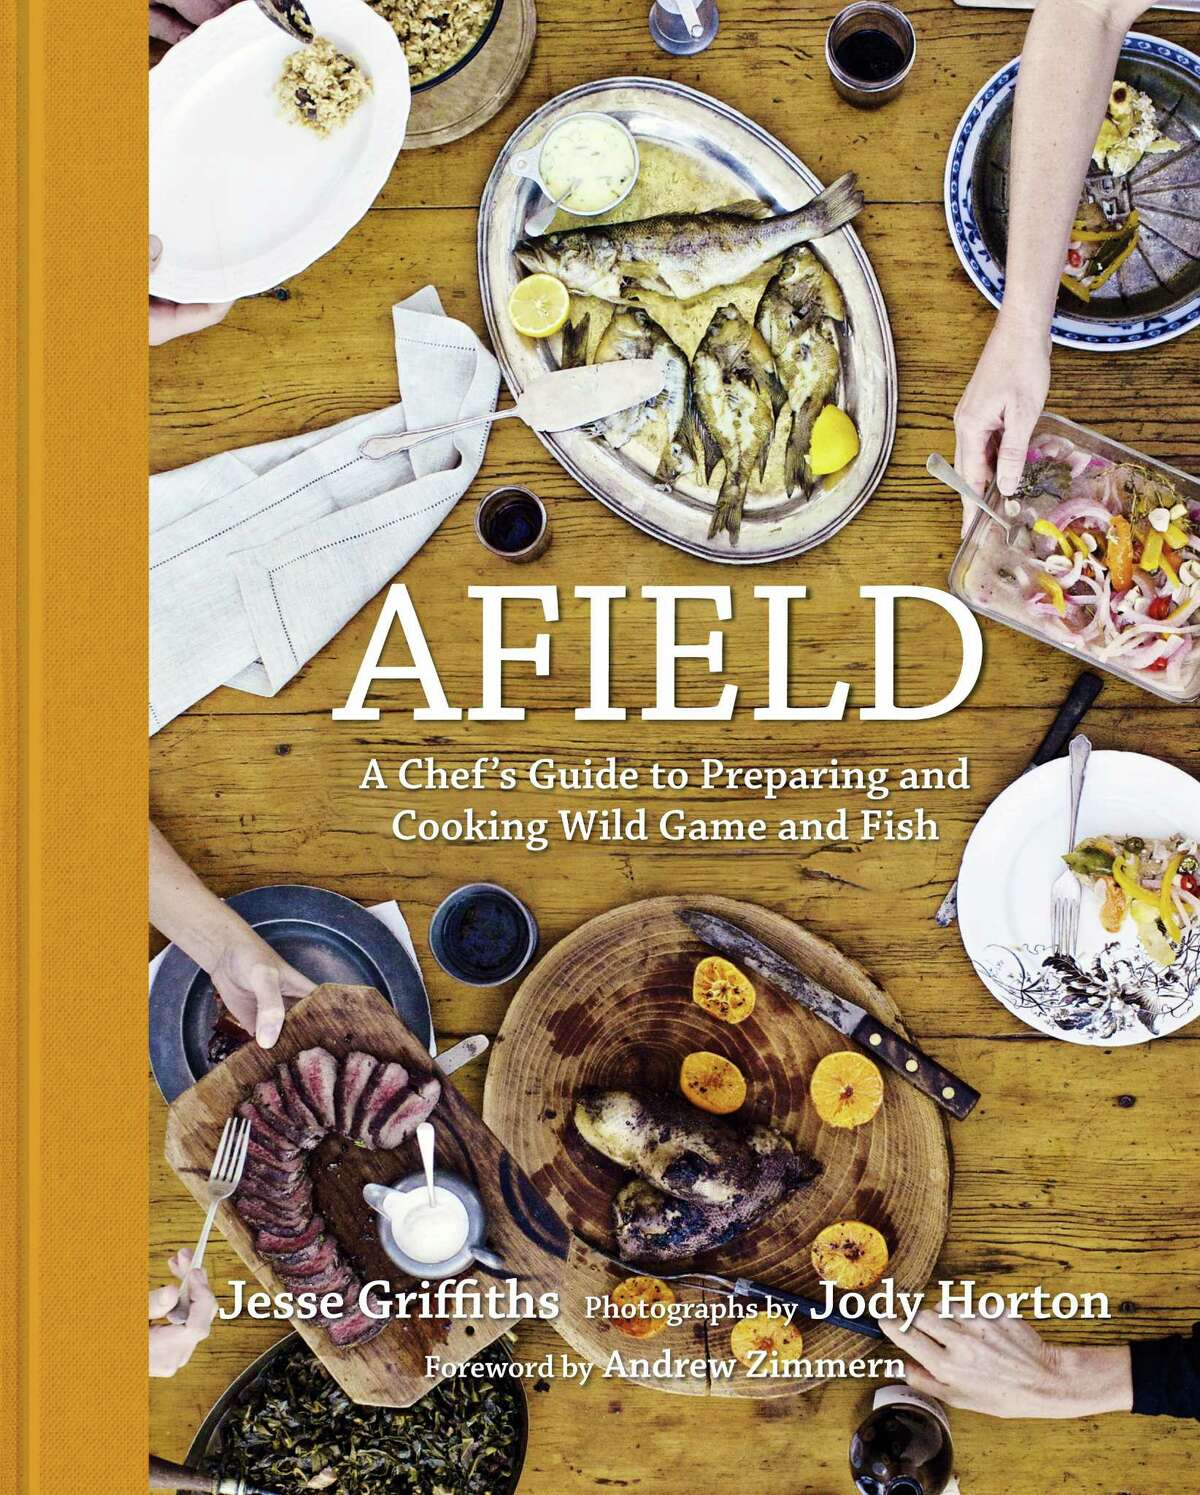 Cover "Afield" by Jesse Griffiths (Welcome Books).